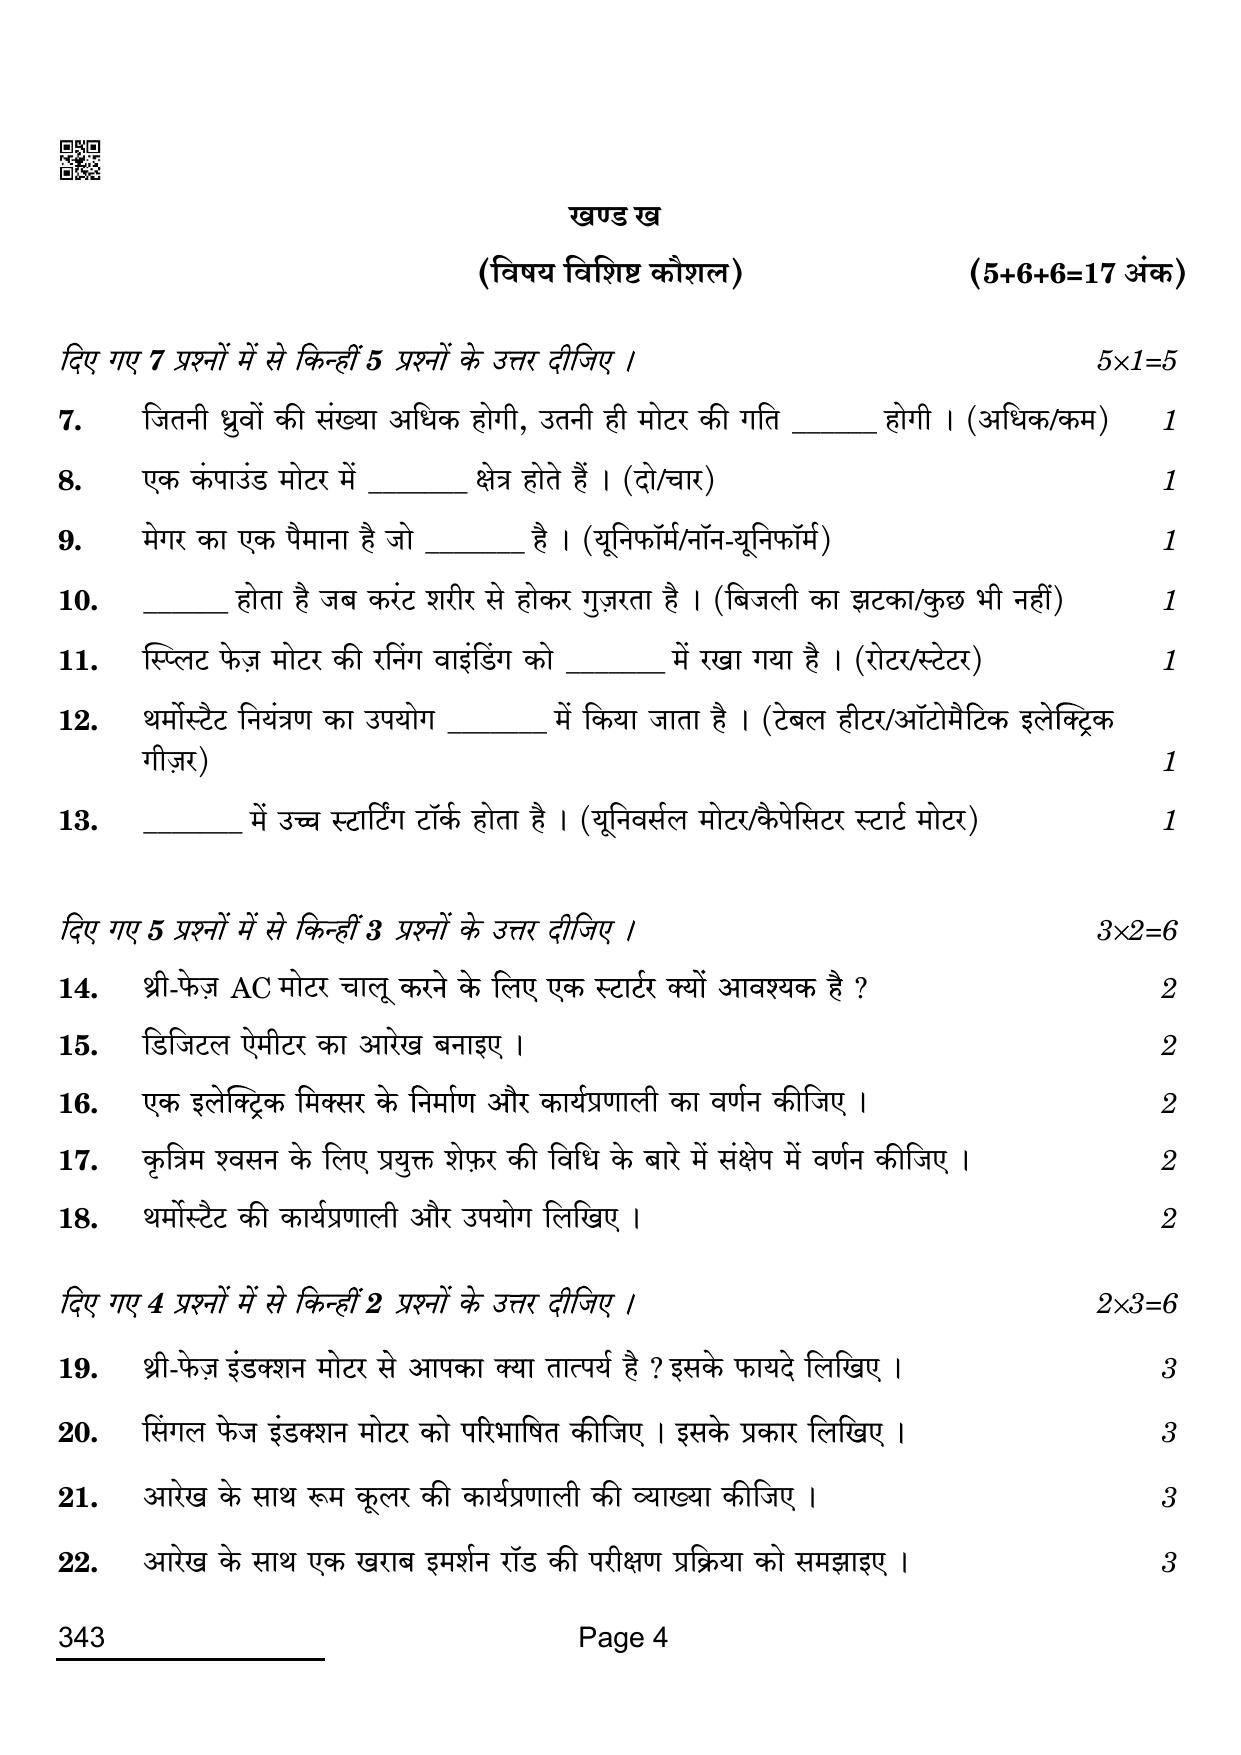 CBSE Class 12 343_Electrical Technology 2022 Question Paper - Page 4